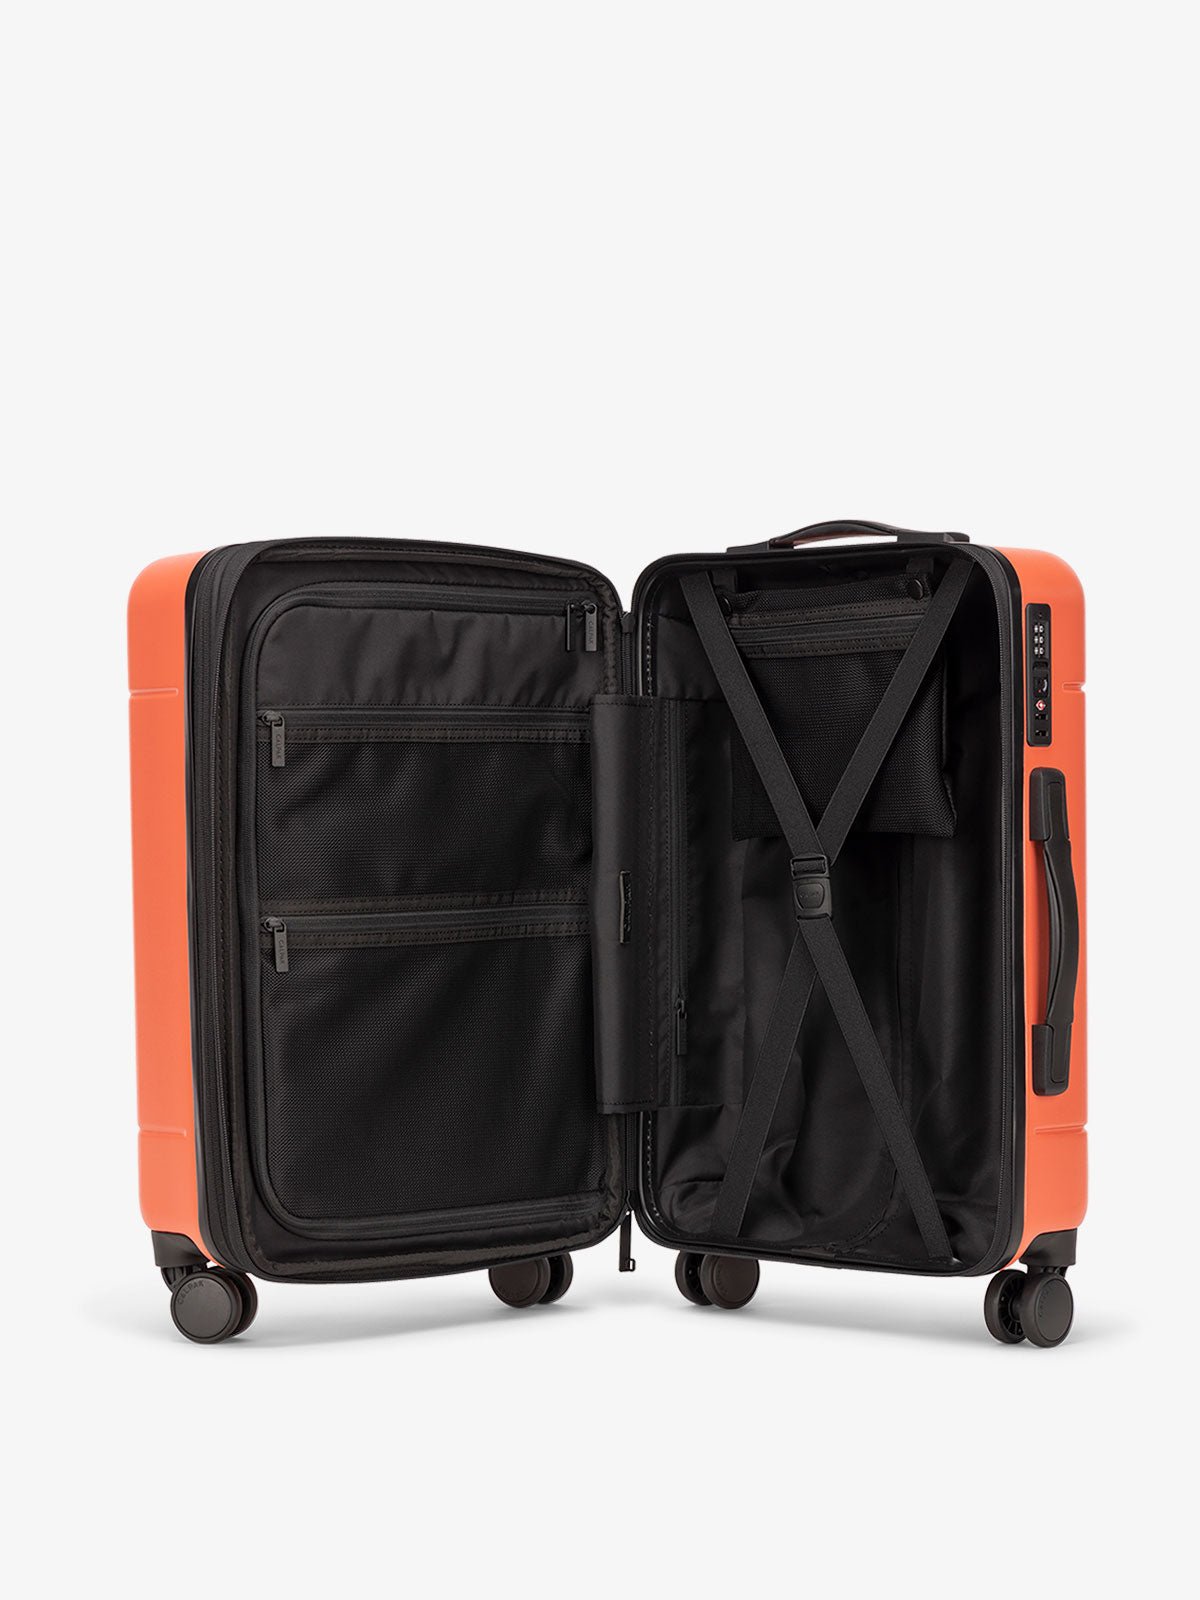 Interior of Hue rolling carry-on suitcase in red poppy